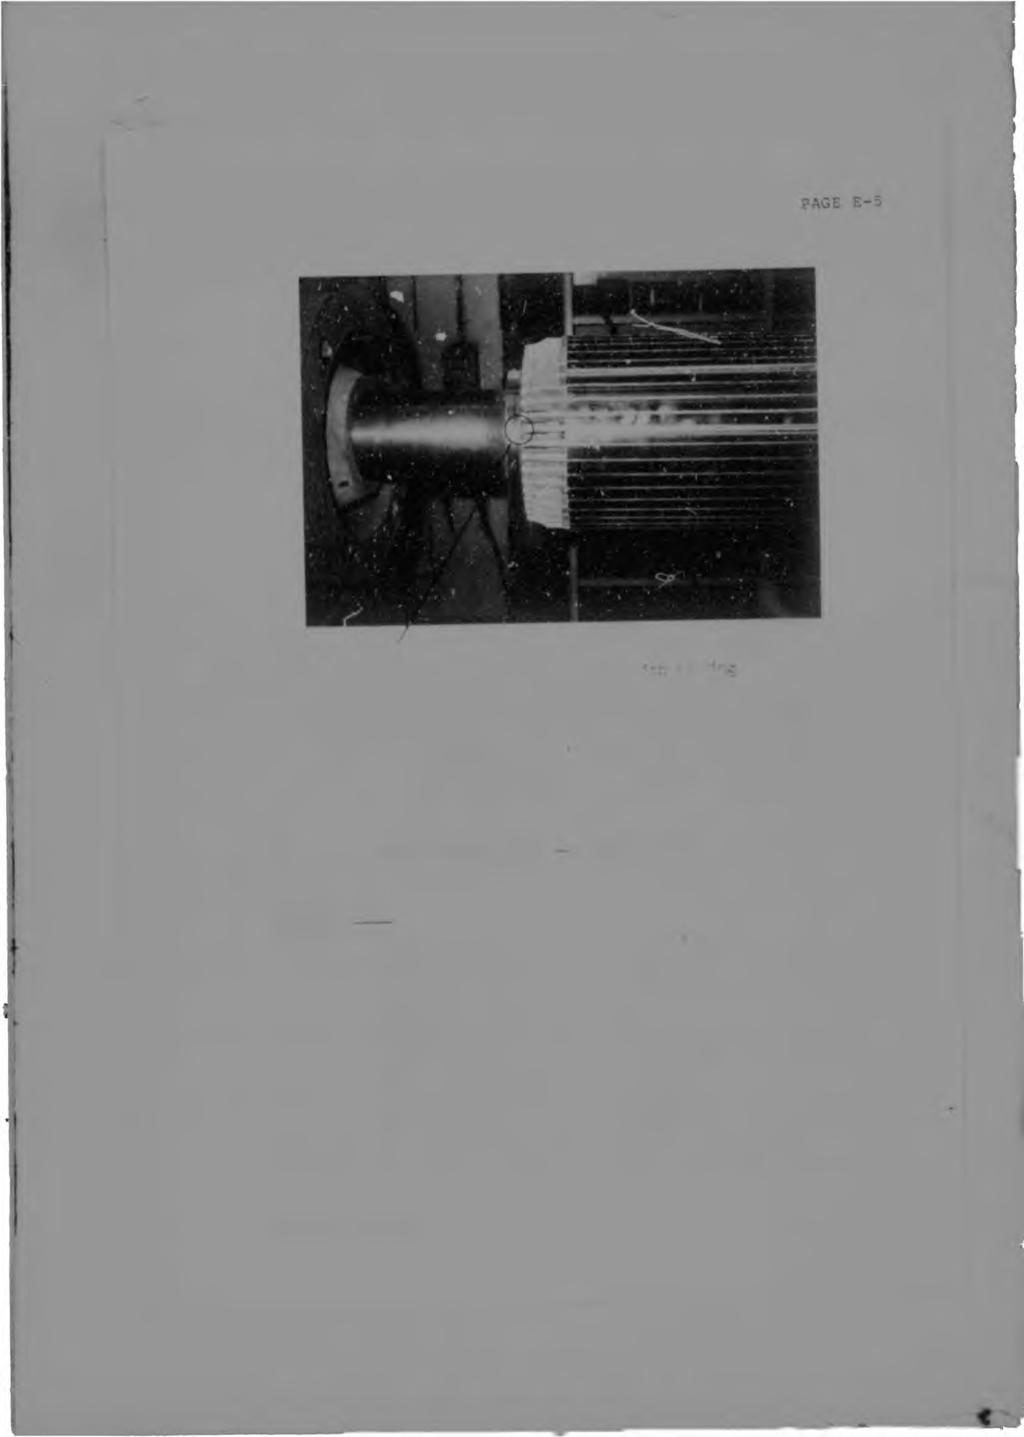 0 Shortened rotcv-bar. 'to cor.*:act w. -tr.dz*... Figure E.5 - View of the rotor of industrial motor A showing the broken1 bar. X. E.2 - Industr il l motor B (F igure E.